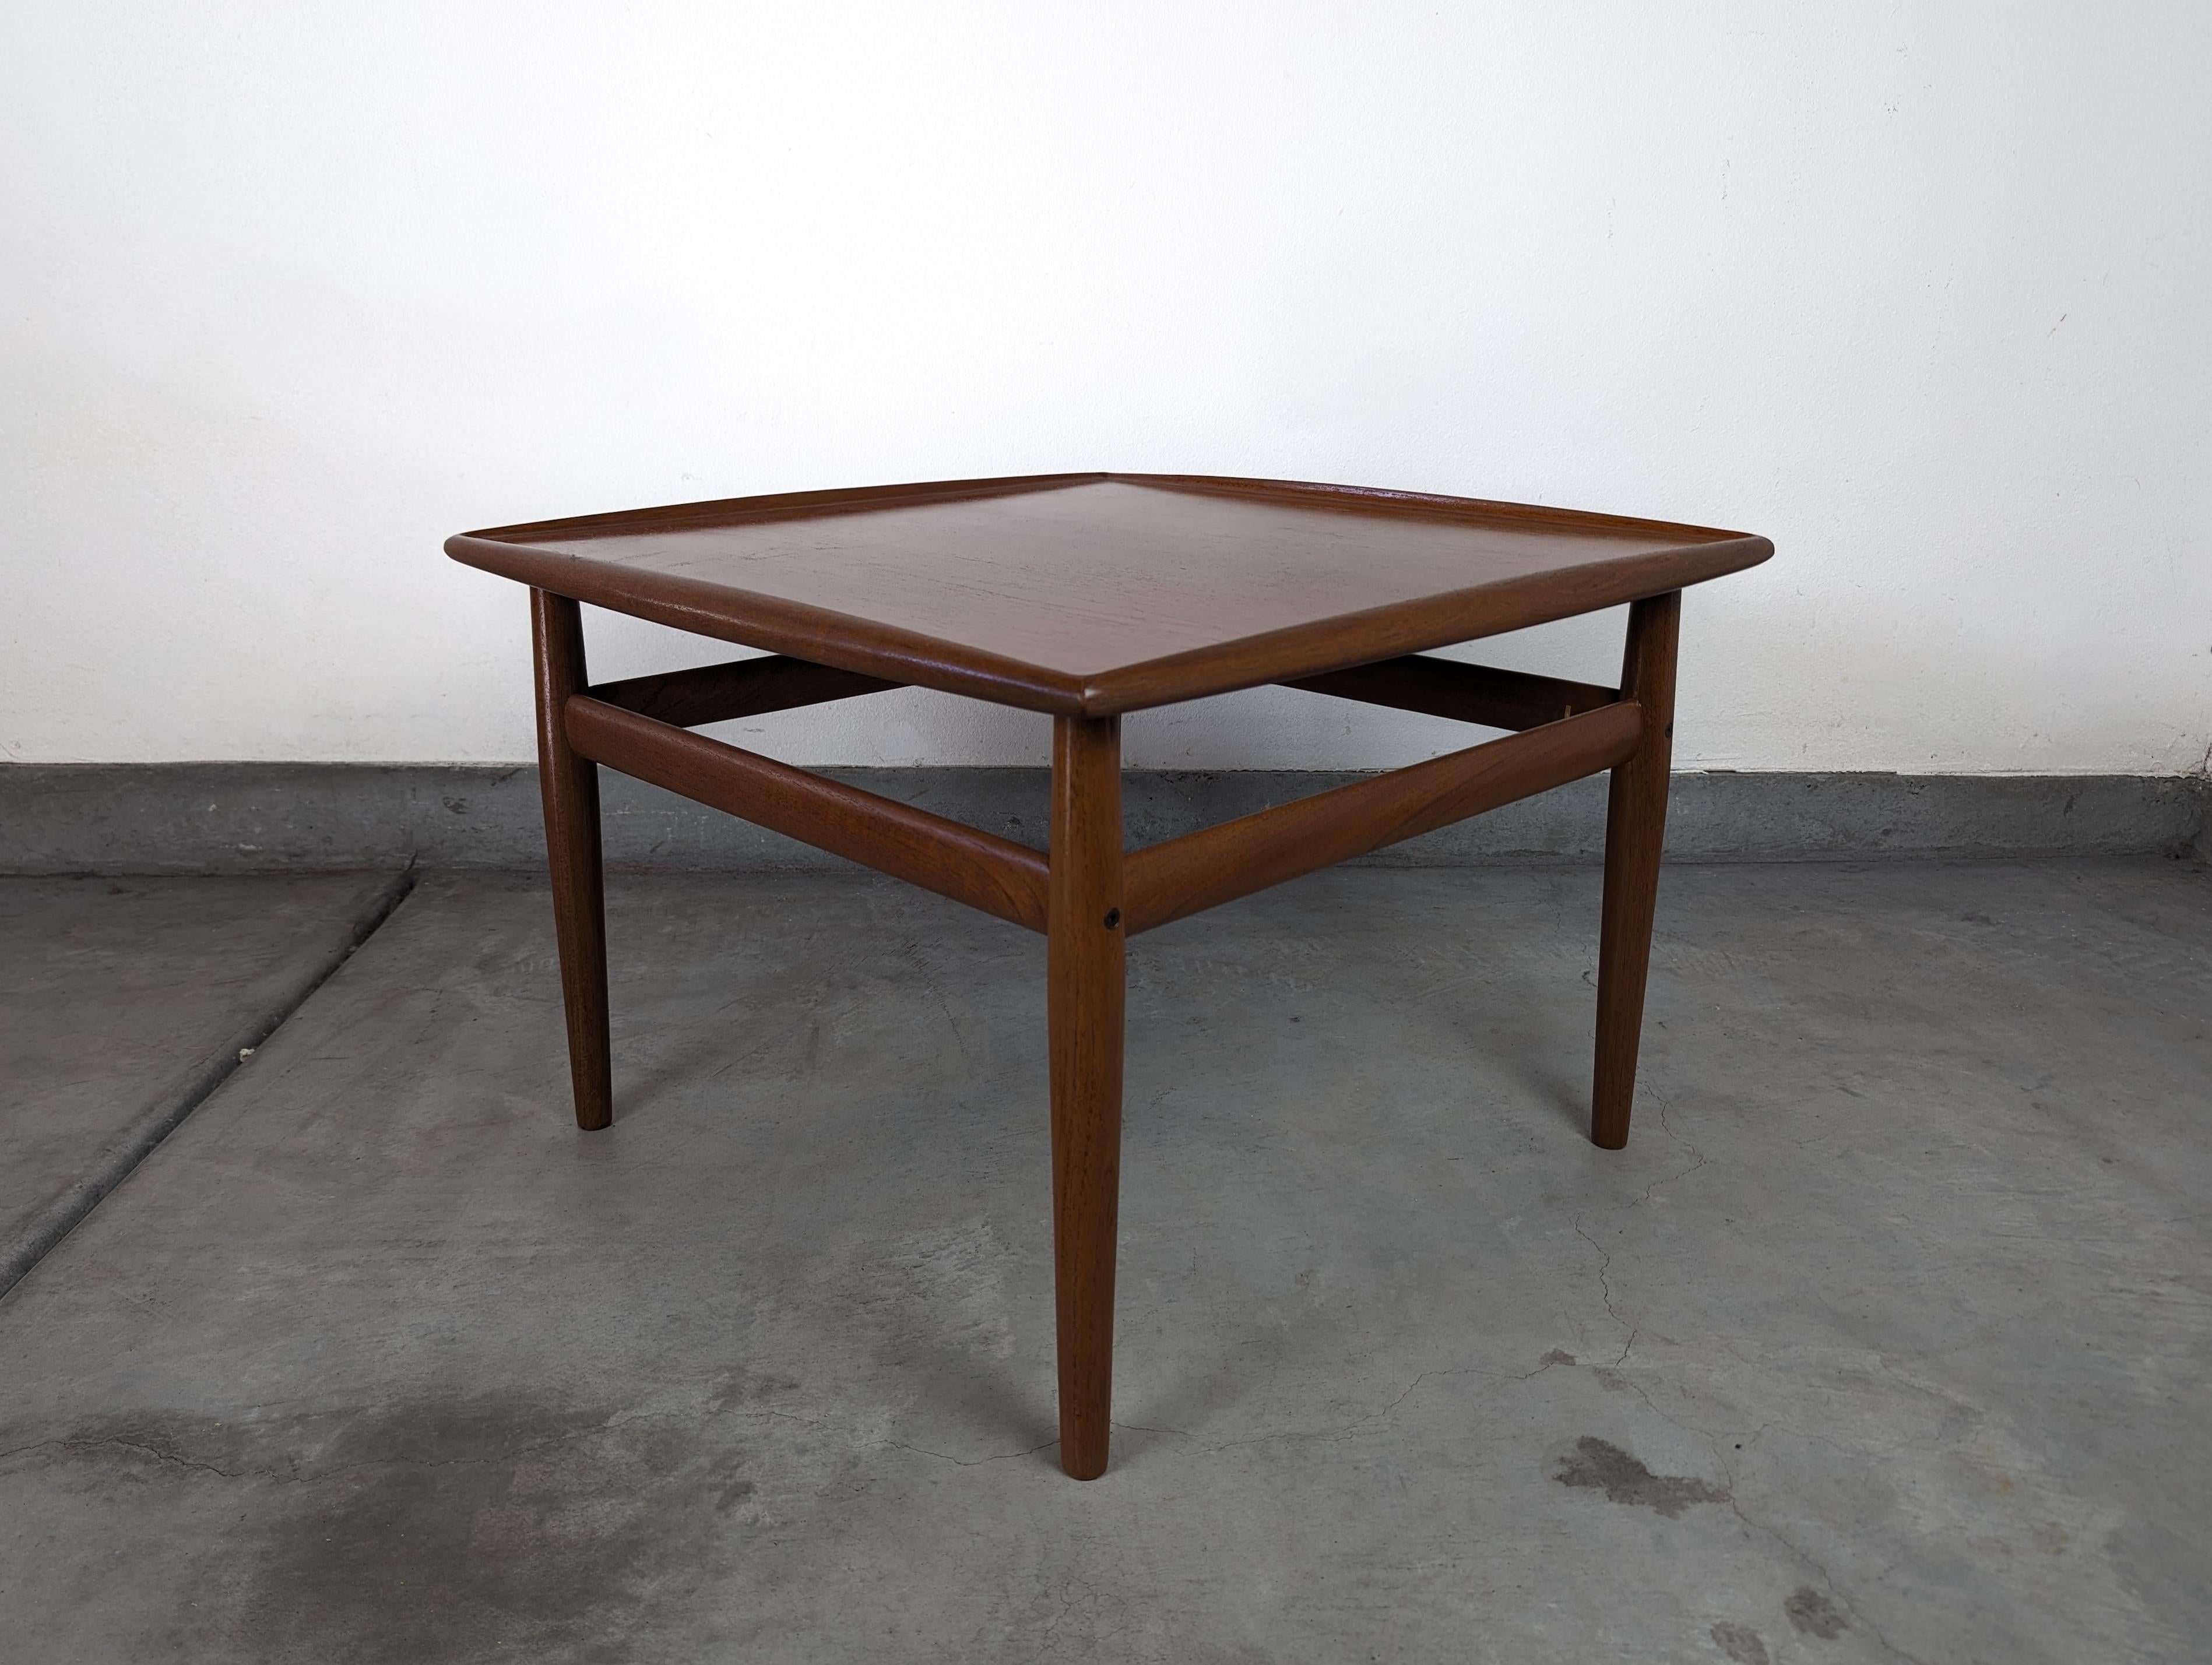 Introducing a stunning vintage Mid-Century Modern teak side table by the renowned Danish designer Grete Jalk for Glostrup Møbelfabrik, dating back to the 1960s. This remarkable piece of Danish history will not only serve as a functional item in your